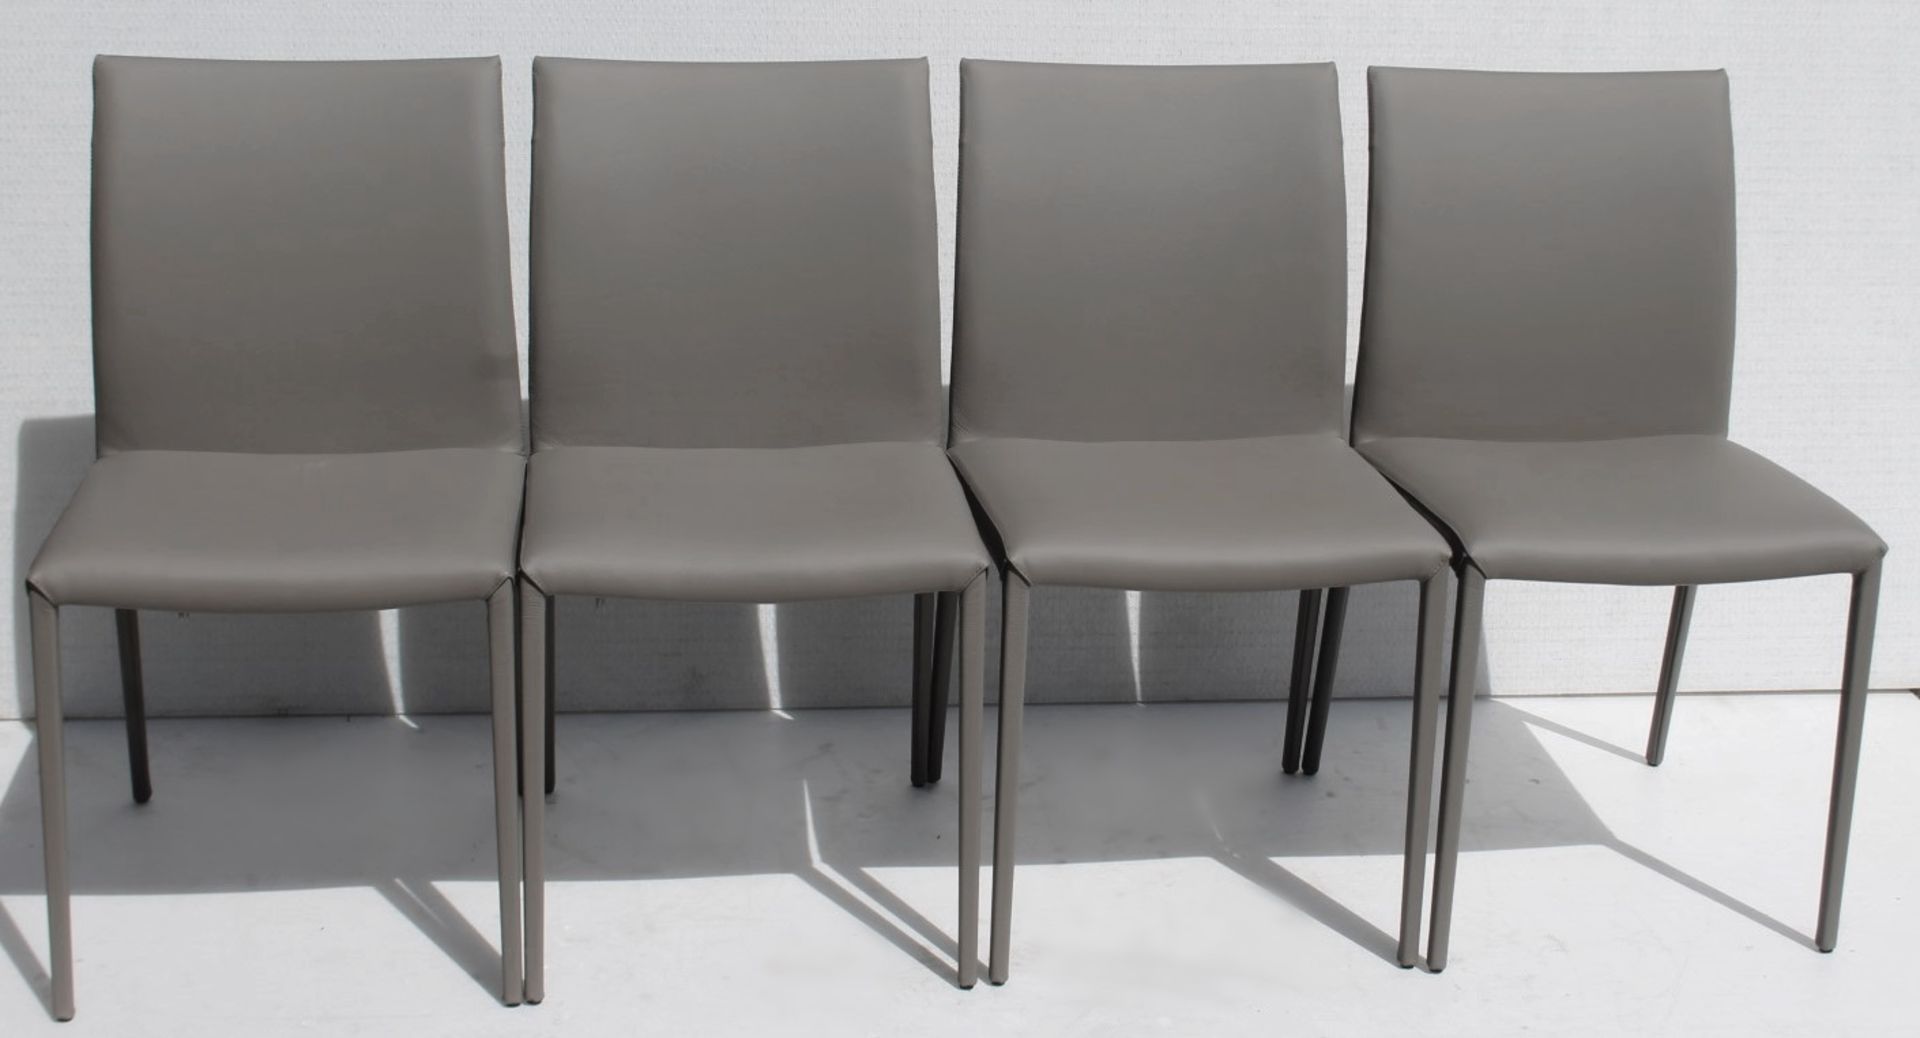 4 x CATELLAN 'Norma' Designer Italian Dining Chairs In Soft Grey Leather - Original RRP £3,840 - Image 6 of 7